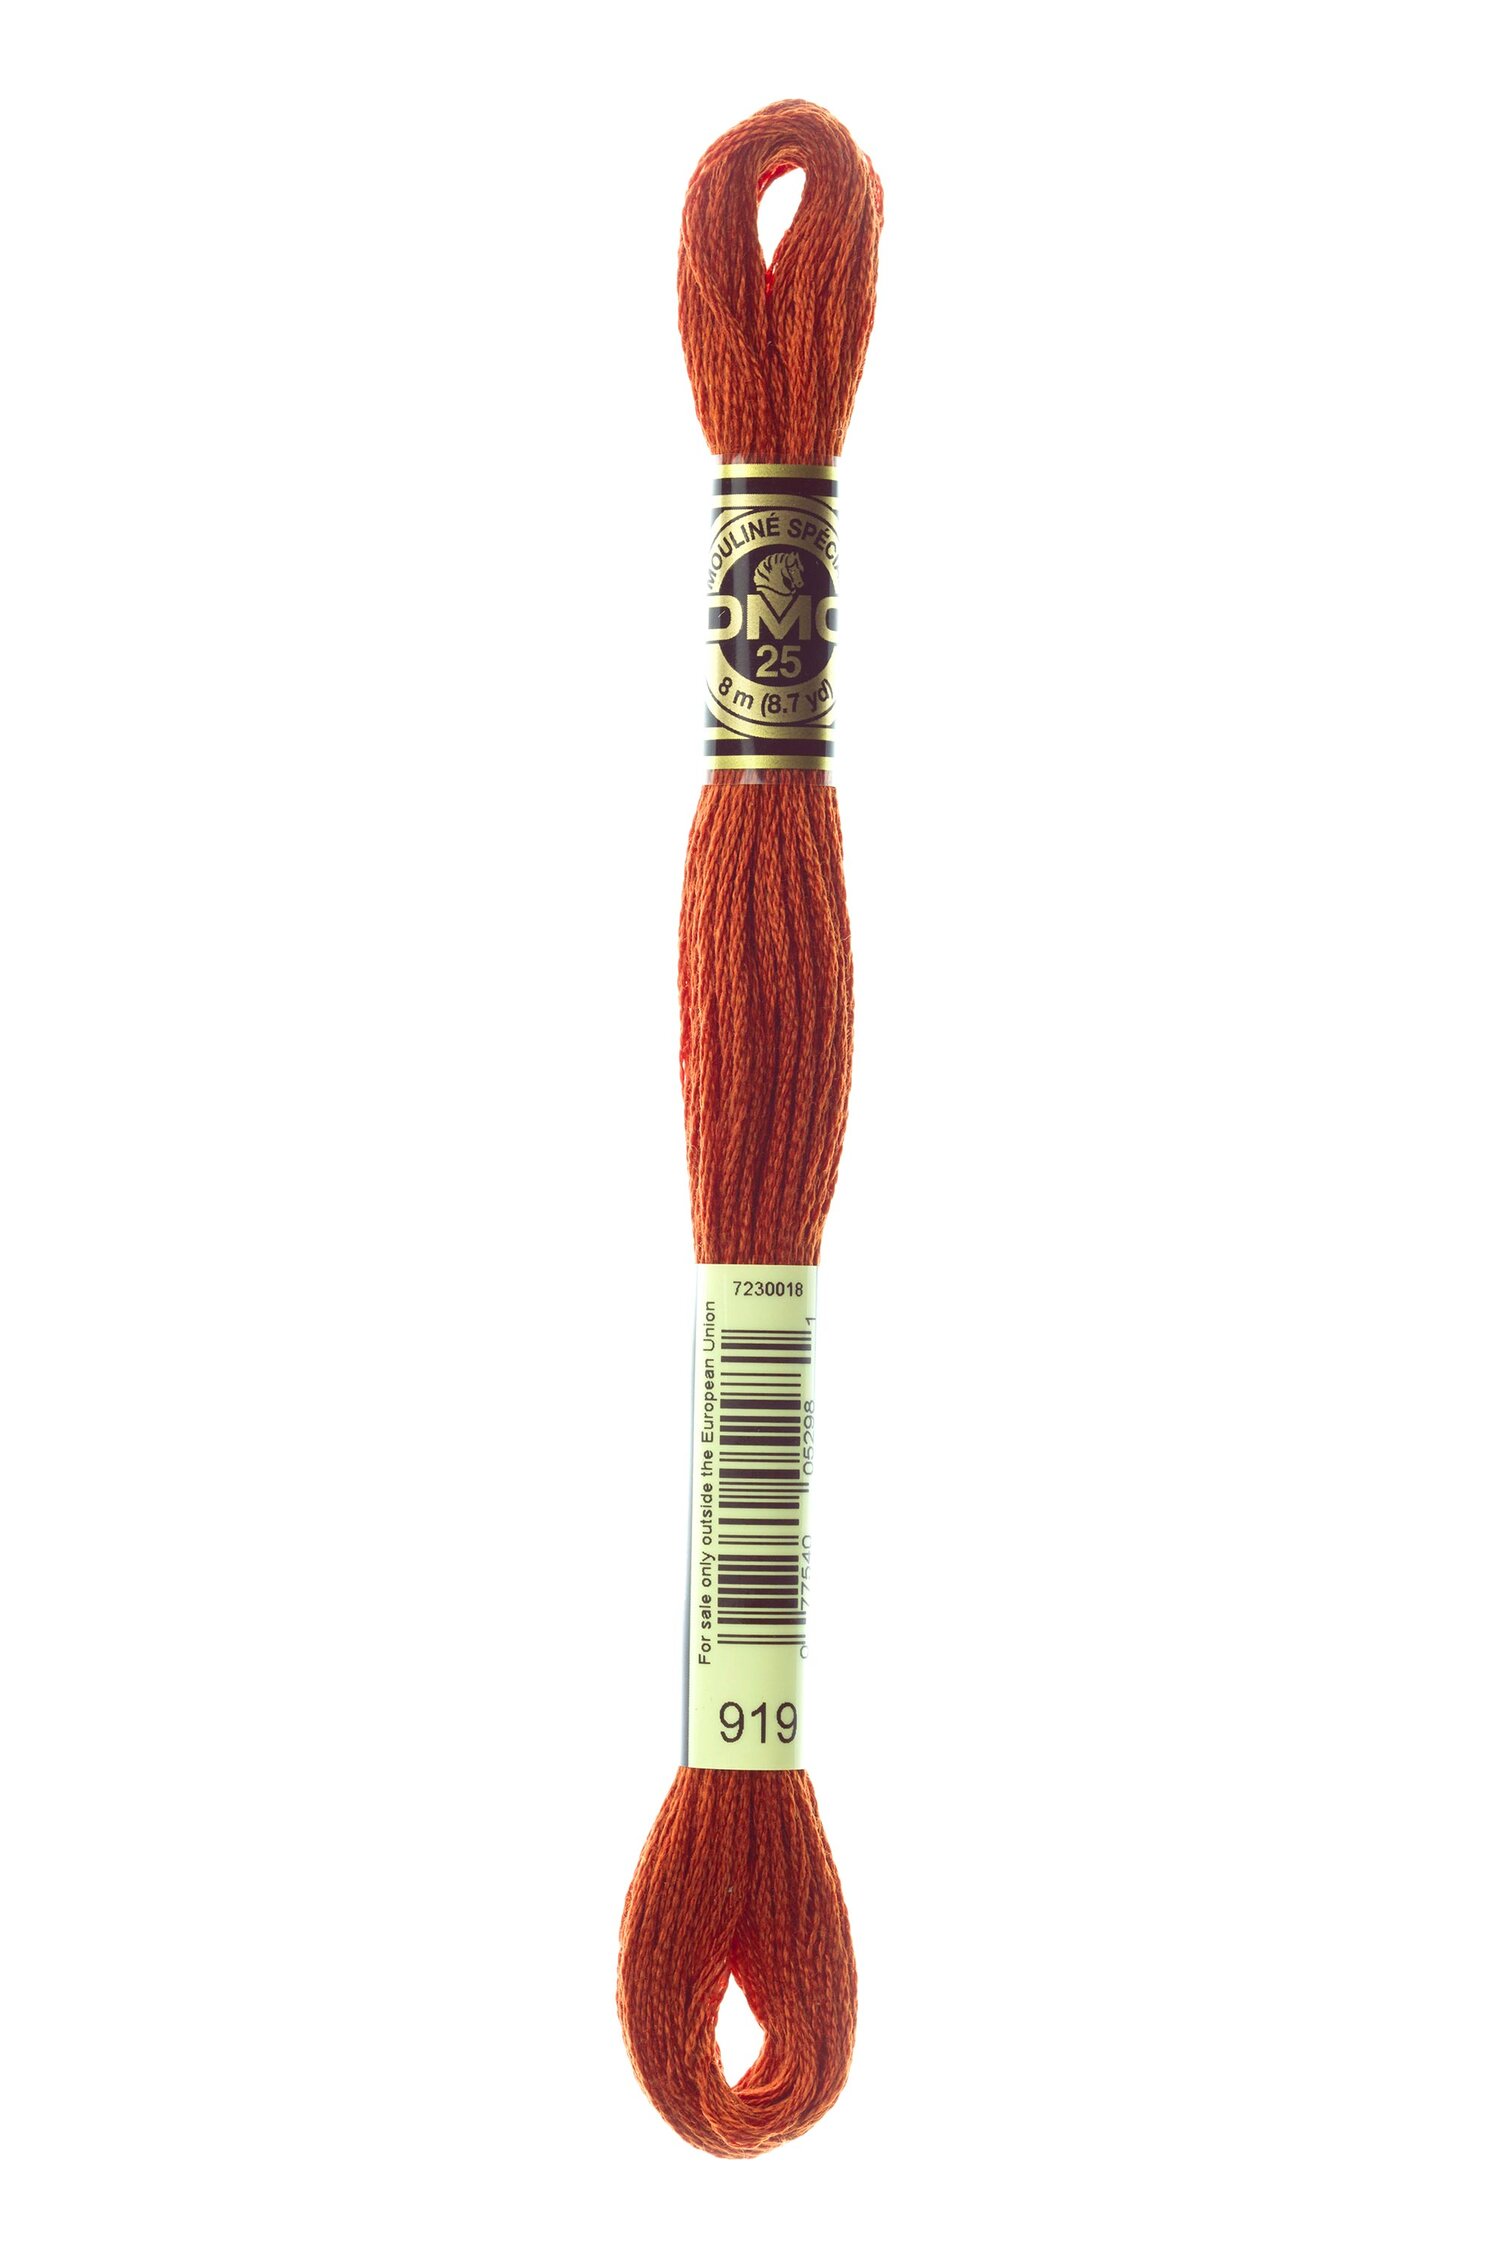 The Urban Store Embroidery Thread Red Copper DMC 919 RRP 1.40 CLEARANCE XL 99p